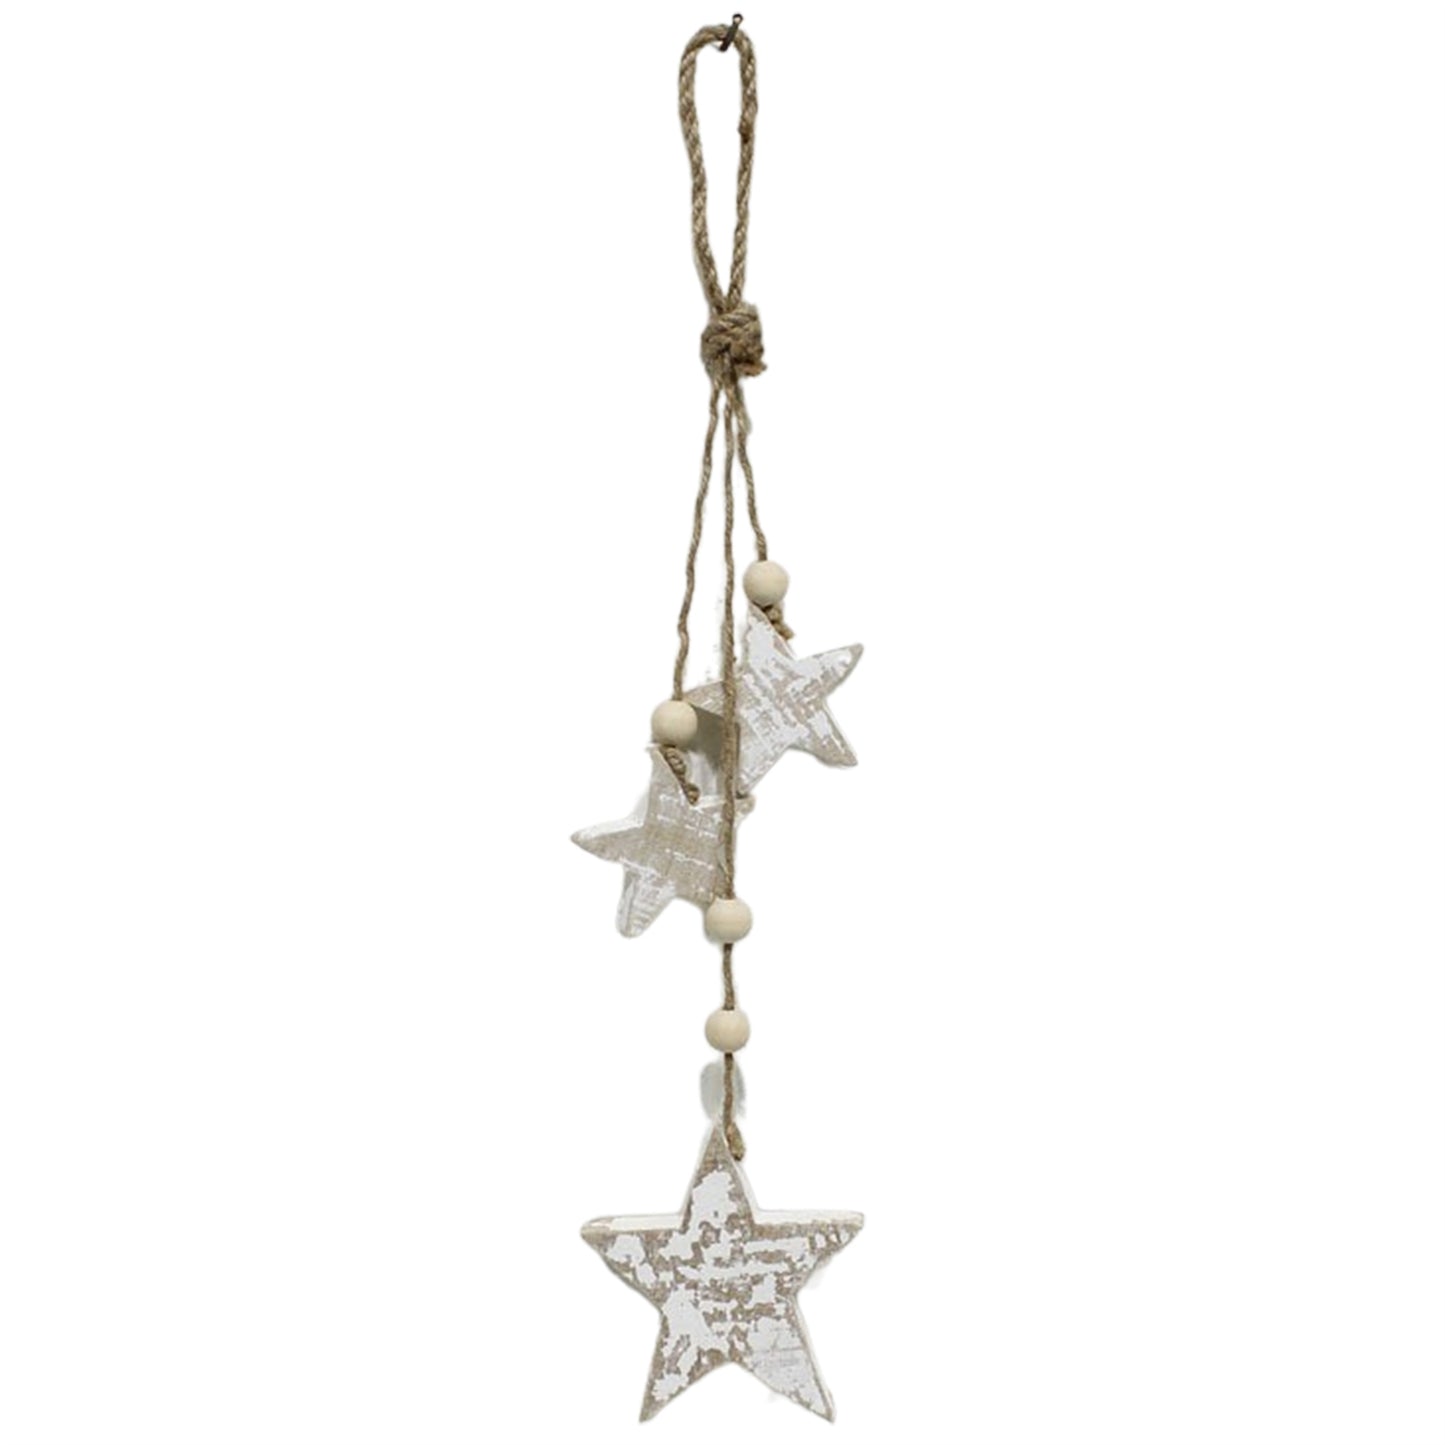 Wooden White 3-Star Hanger with Jute Rope